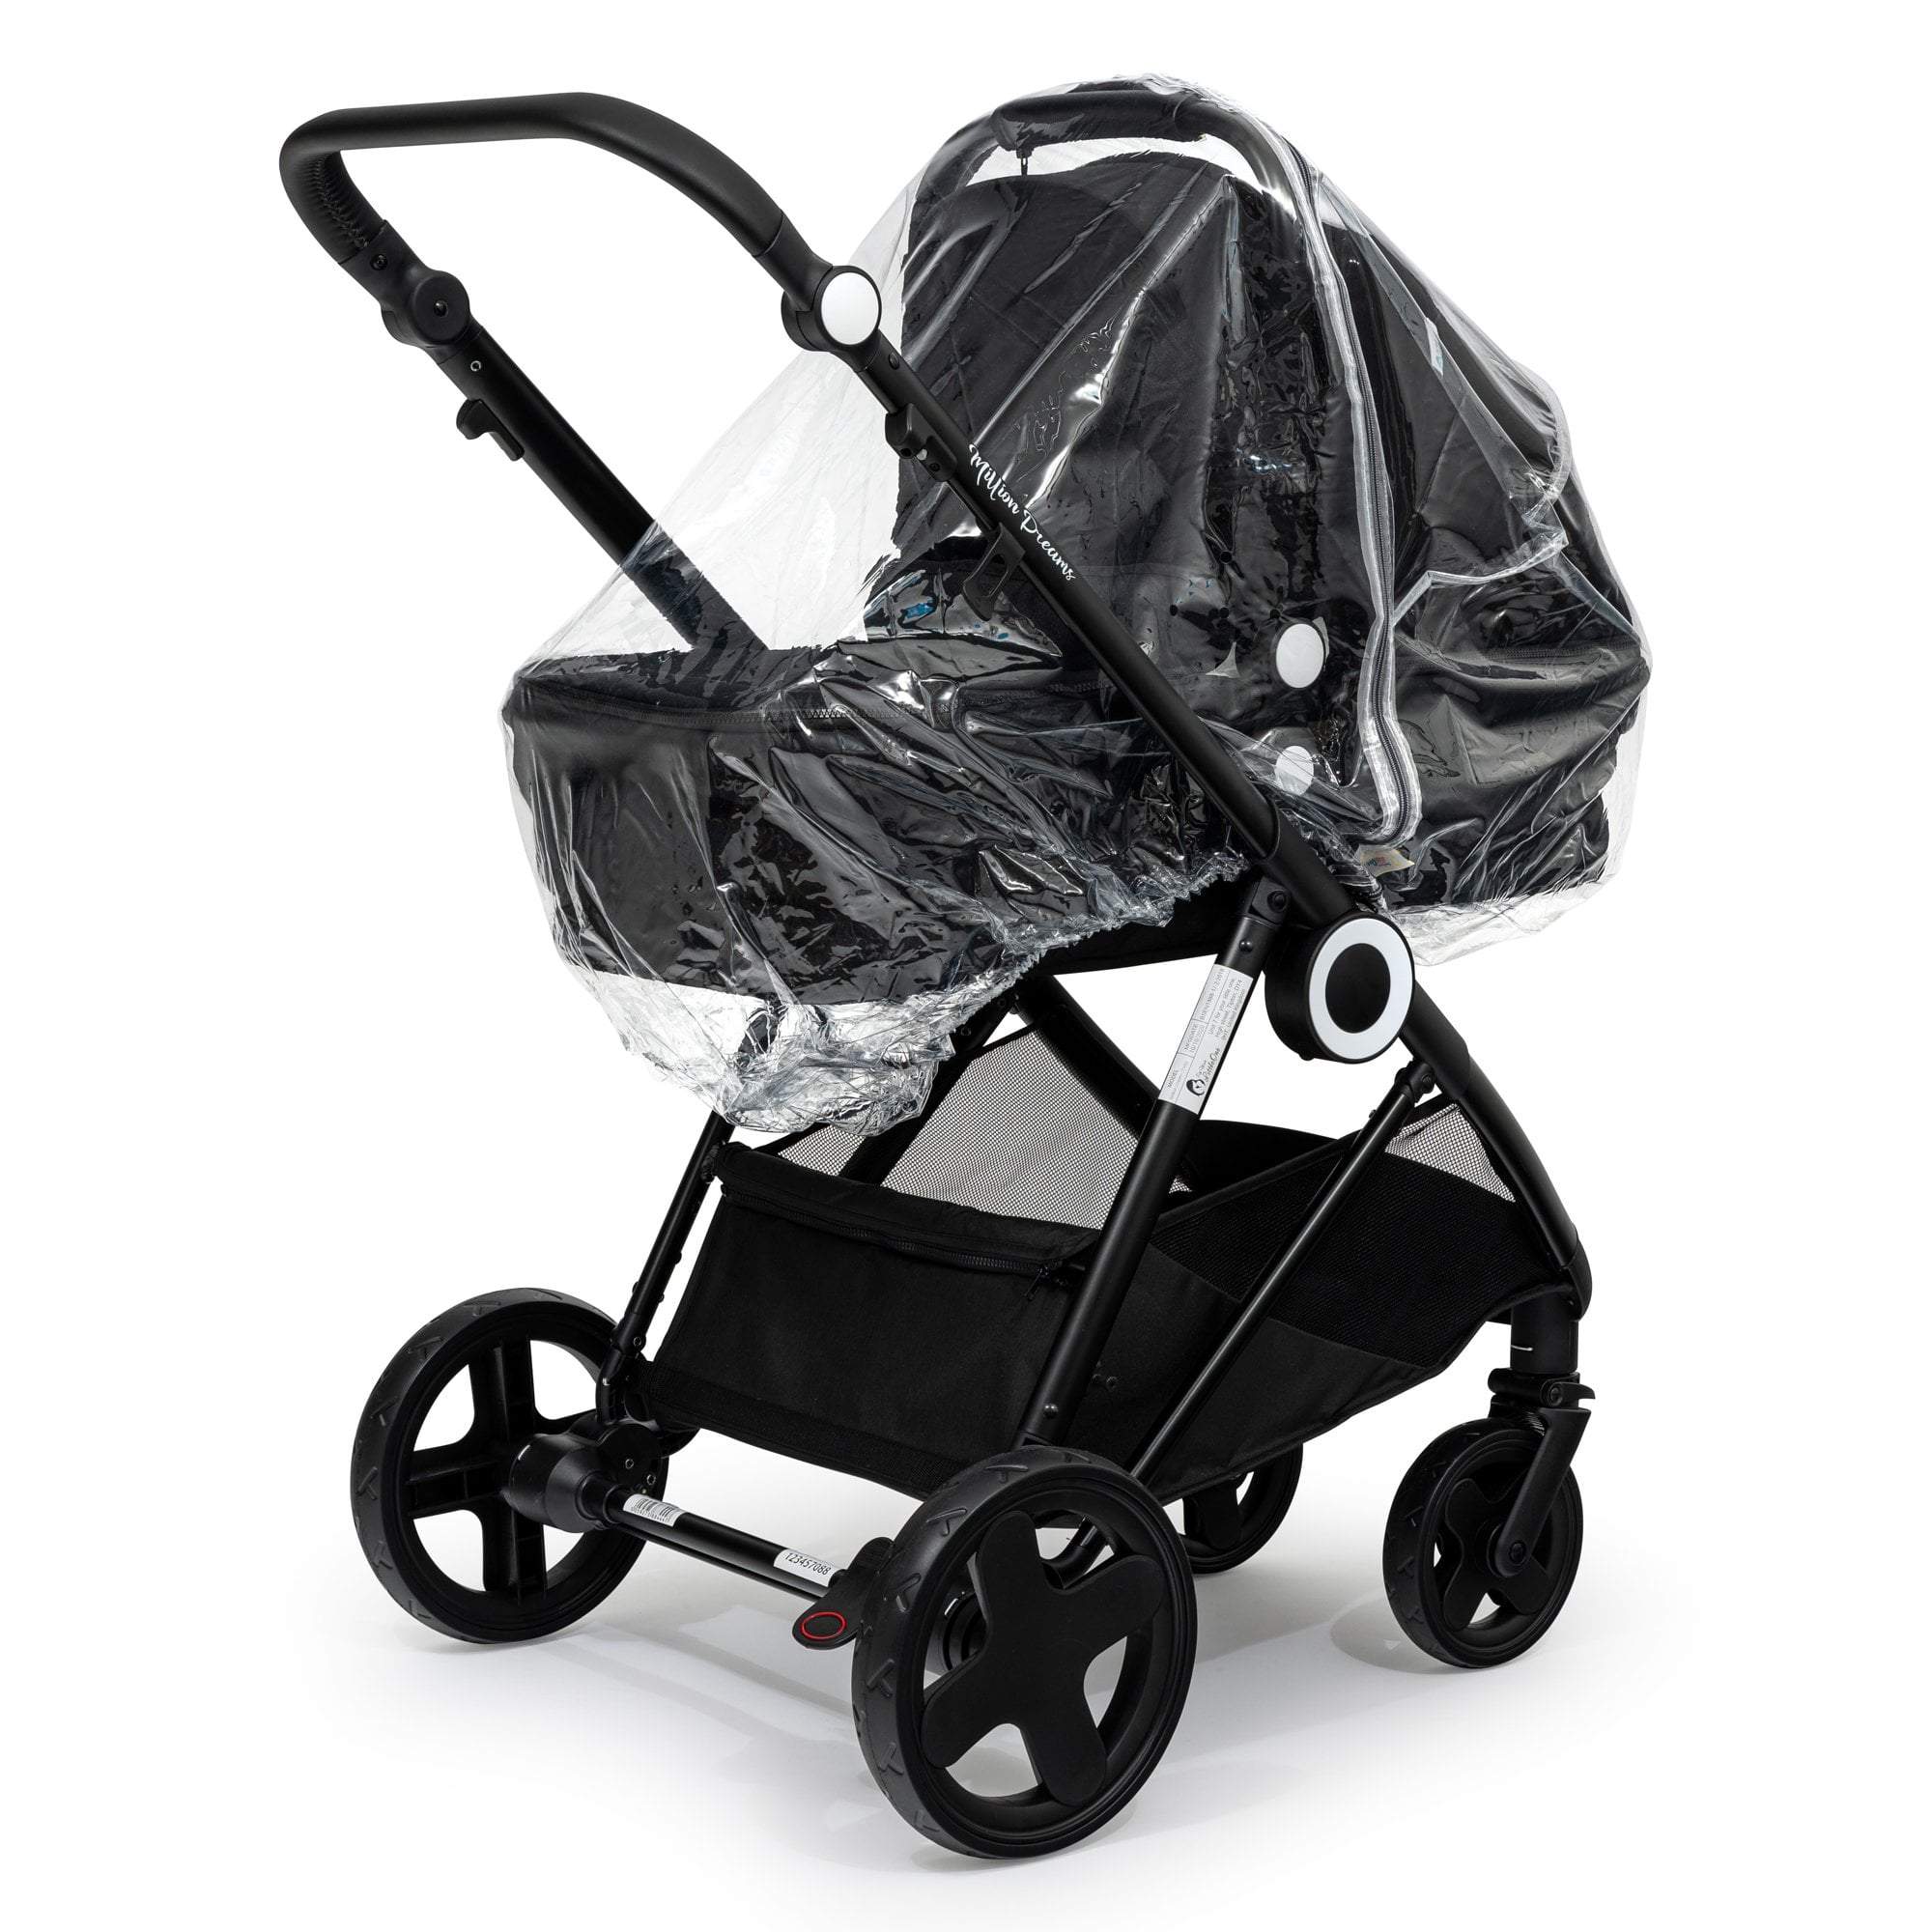 Carrycot Raincover Compatible With NeoNato - Fits All Models - For Your Little One